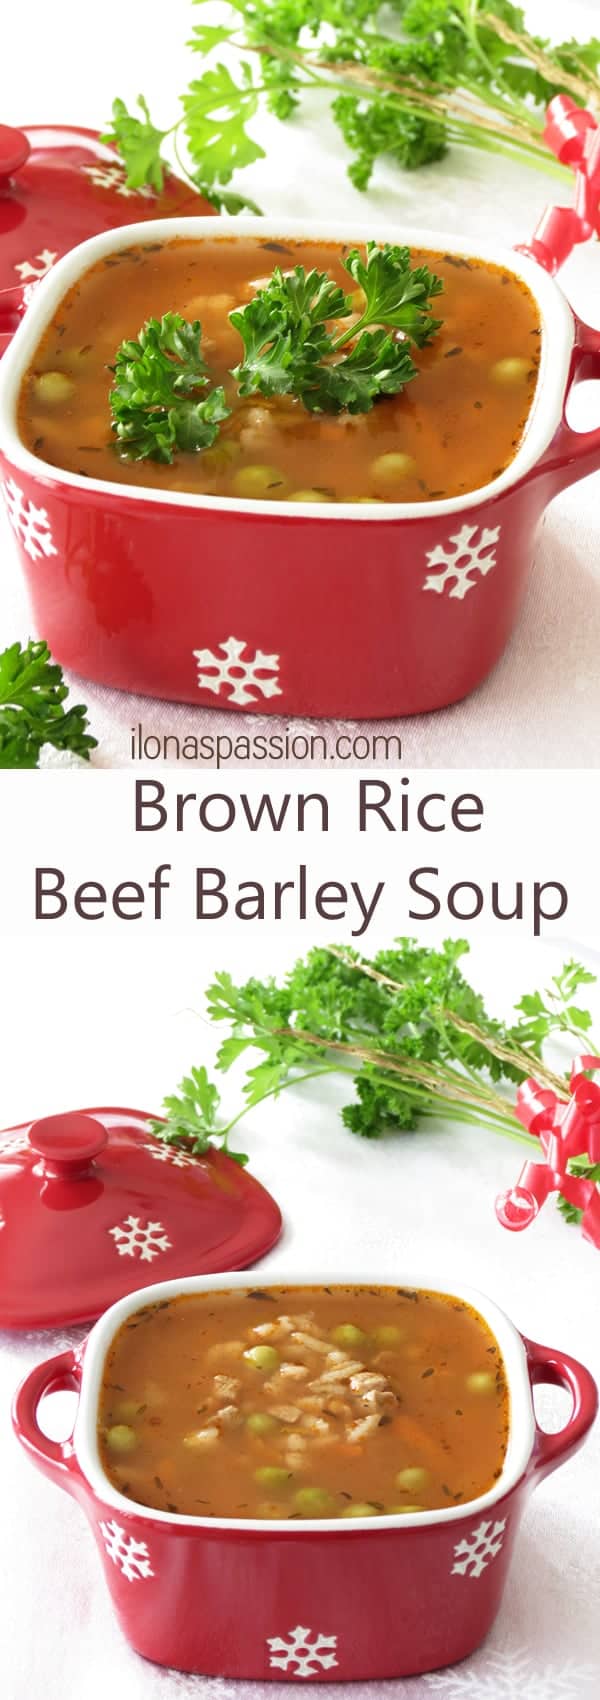 Hearty Purple meat Barley Soup with brown rice. Supreme for cool months! by ilonaspassion.com  Brown Rice Purple meat Barley Soup Brown Rice Beef Barley Soup2